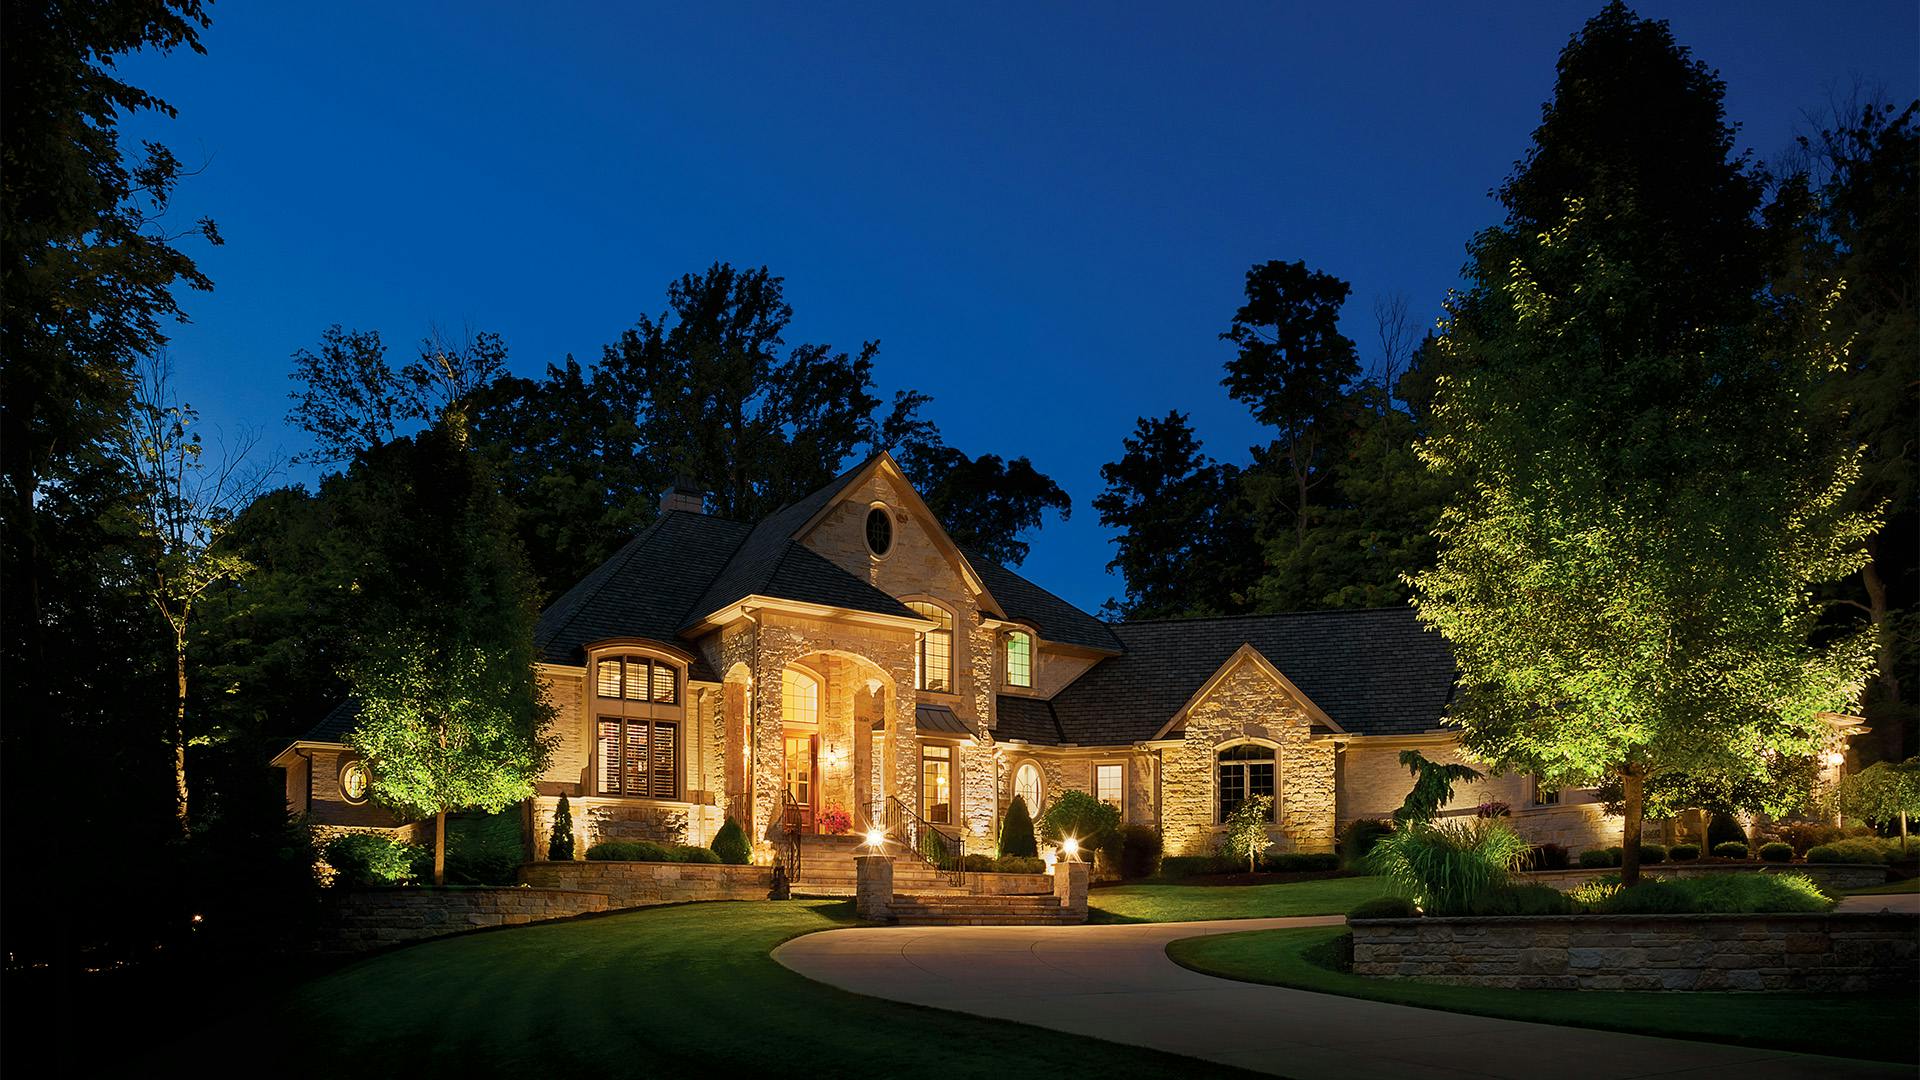 Outdoor night photo of a large home lit up by a variety of lights